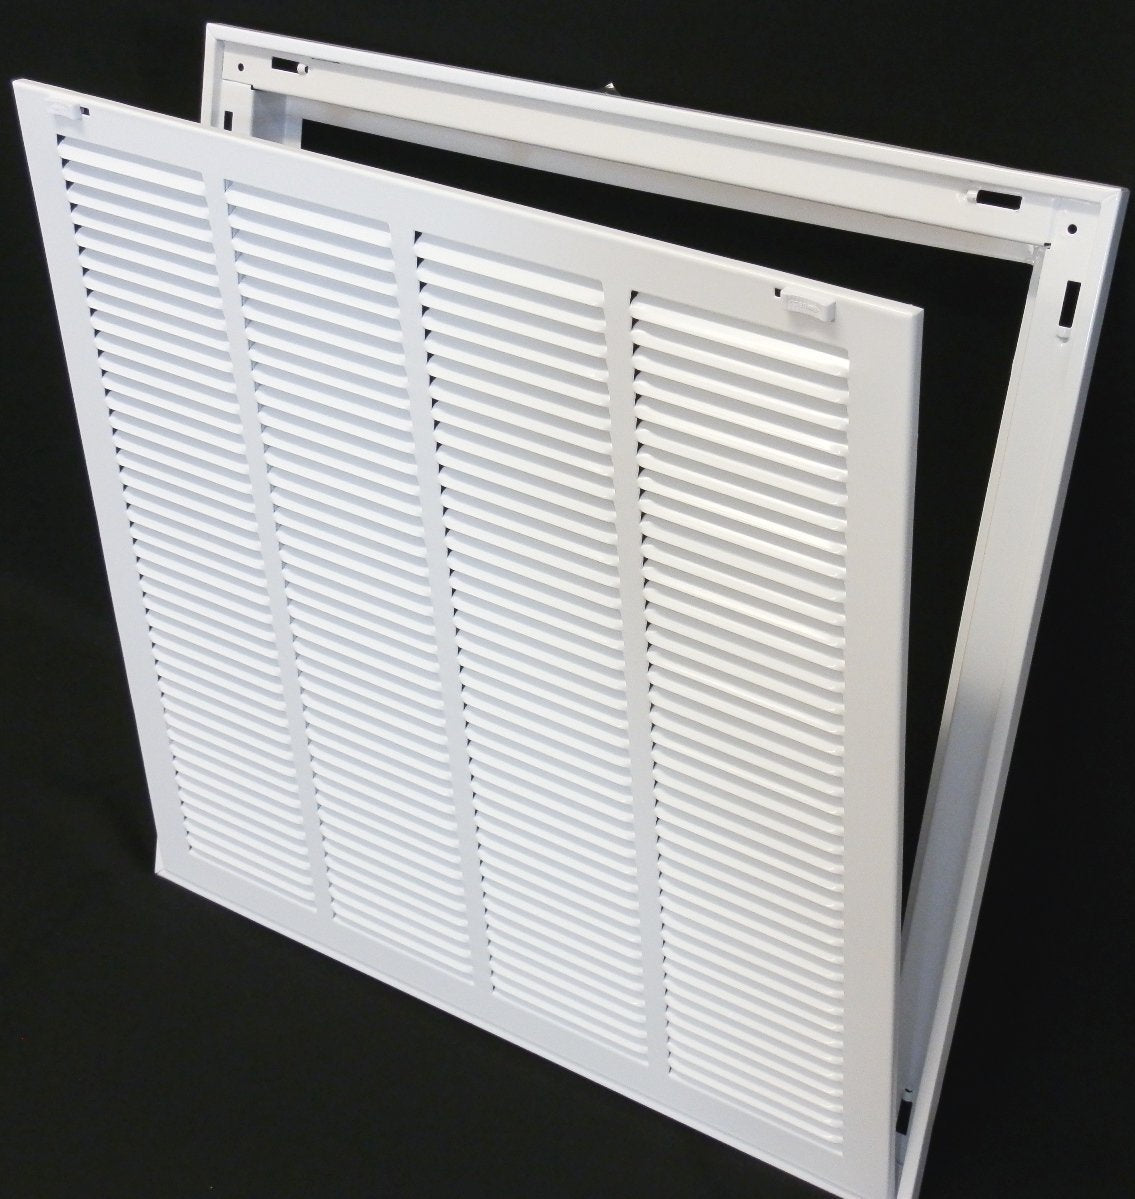 34&quot; X 6&quot; Steel Return Air Filter Grille for 1&quot; Filter - Removable Frame - [Outer Dimensions: 36 5/8&quot; X 8 5/8&quot;]